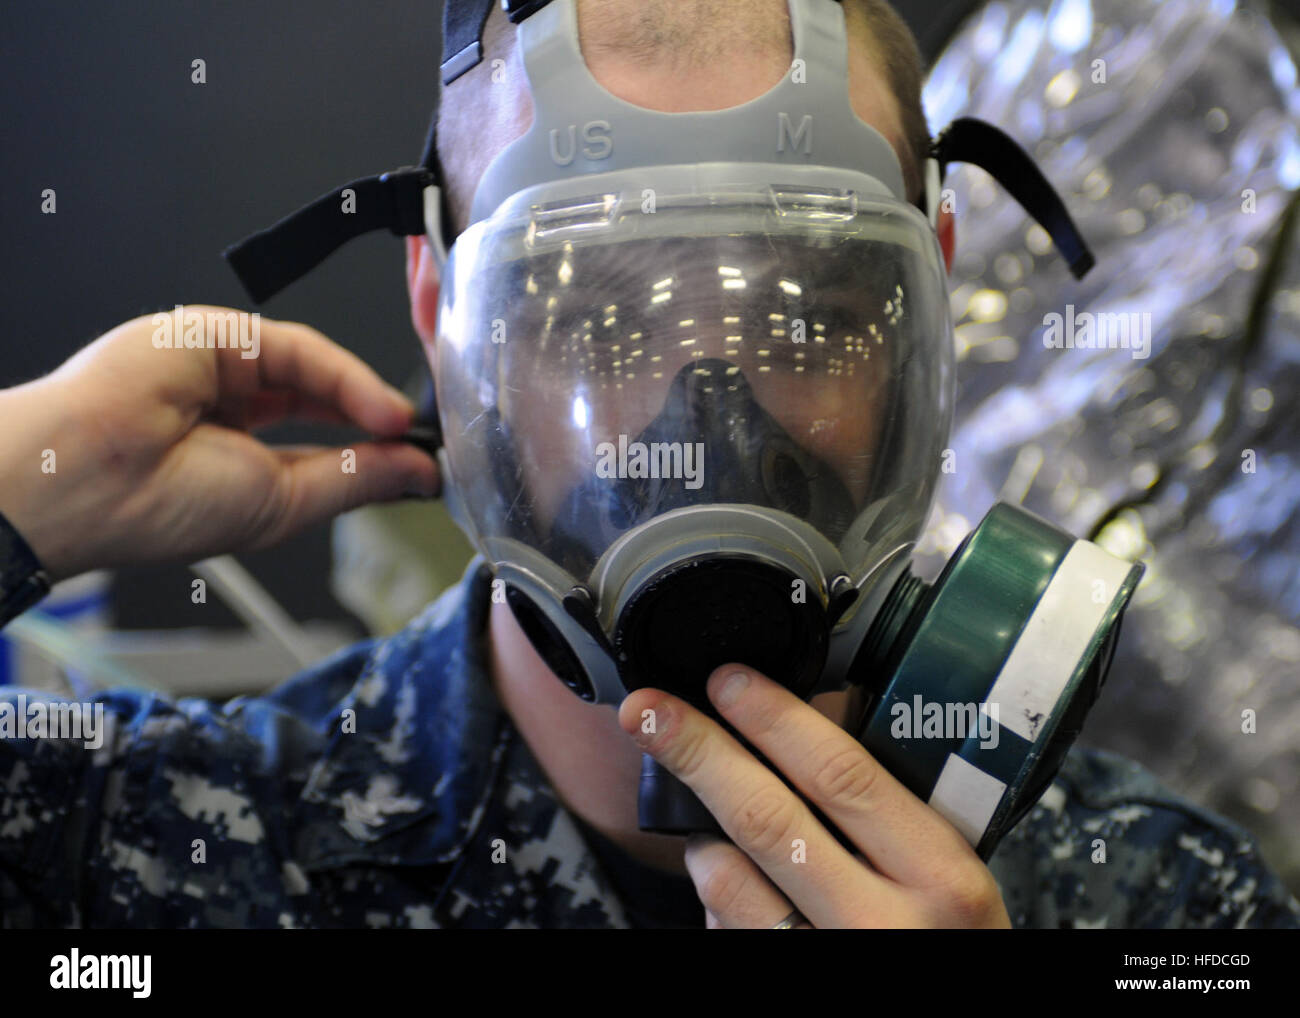 U.S. Navy Aviation Structural Mechanic 2nd Class Thomas Jenkins, assigned to amphibious assault ship USS Makin Island (LHD 8), checks the air seal on his respirator mask during chemical, biological and radiological equipment testing in the ship's hangar bay Jan. 13, 2011, in San Diego, Calif. Makin Island was completing a maintenance availability period in preparation for predeployment operations. (U.S. Navy photo by Mass Communication Specialist 2nd Class Kellie Abedzadeh/Released) U.S. Navy Aviation Structural Mechanic 2nd Class Thomas Jenkins, assigned to amphibious assault ship USS Makin I Stock Photo